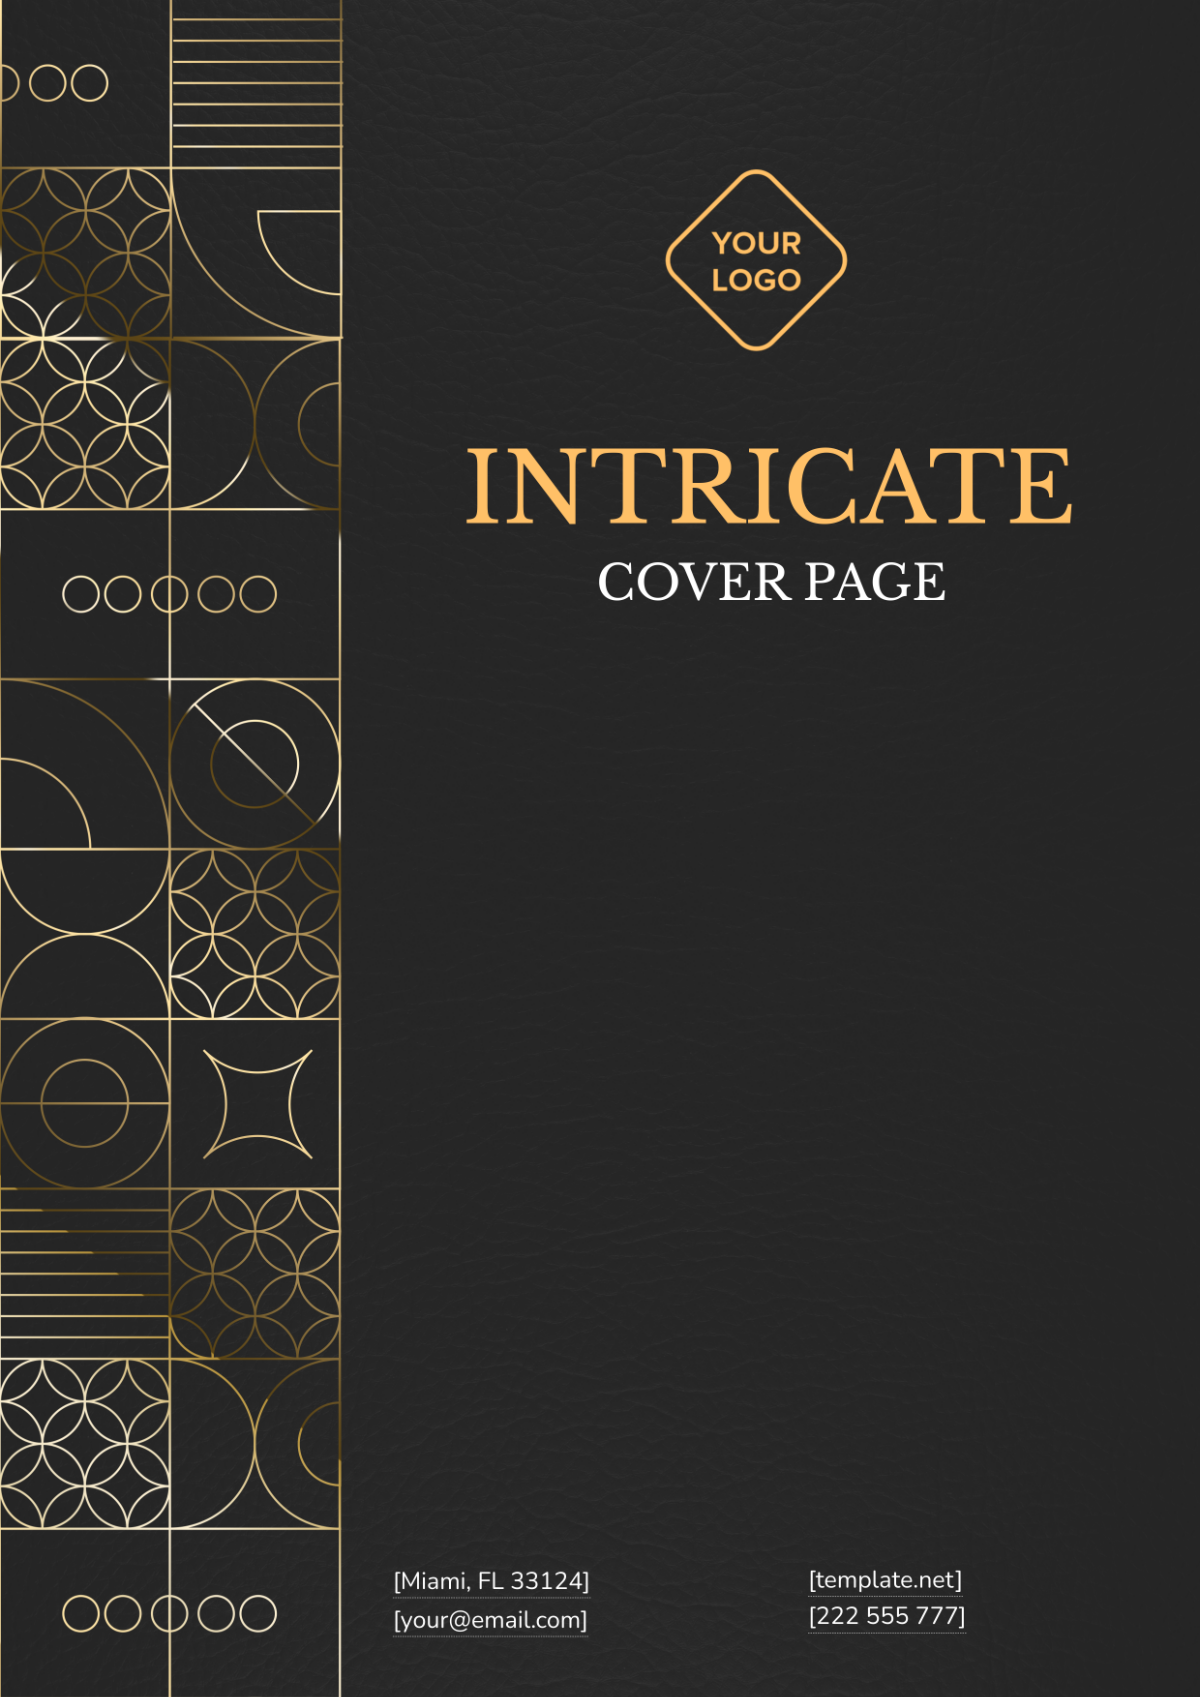 Intricate Cover Page Design